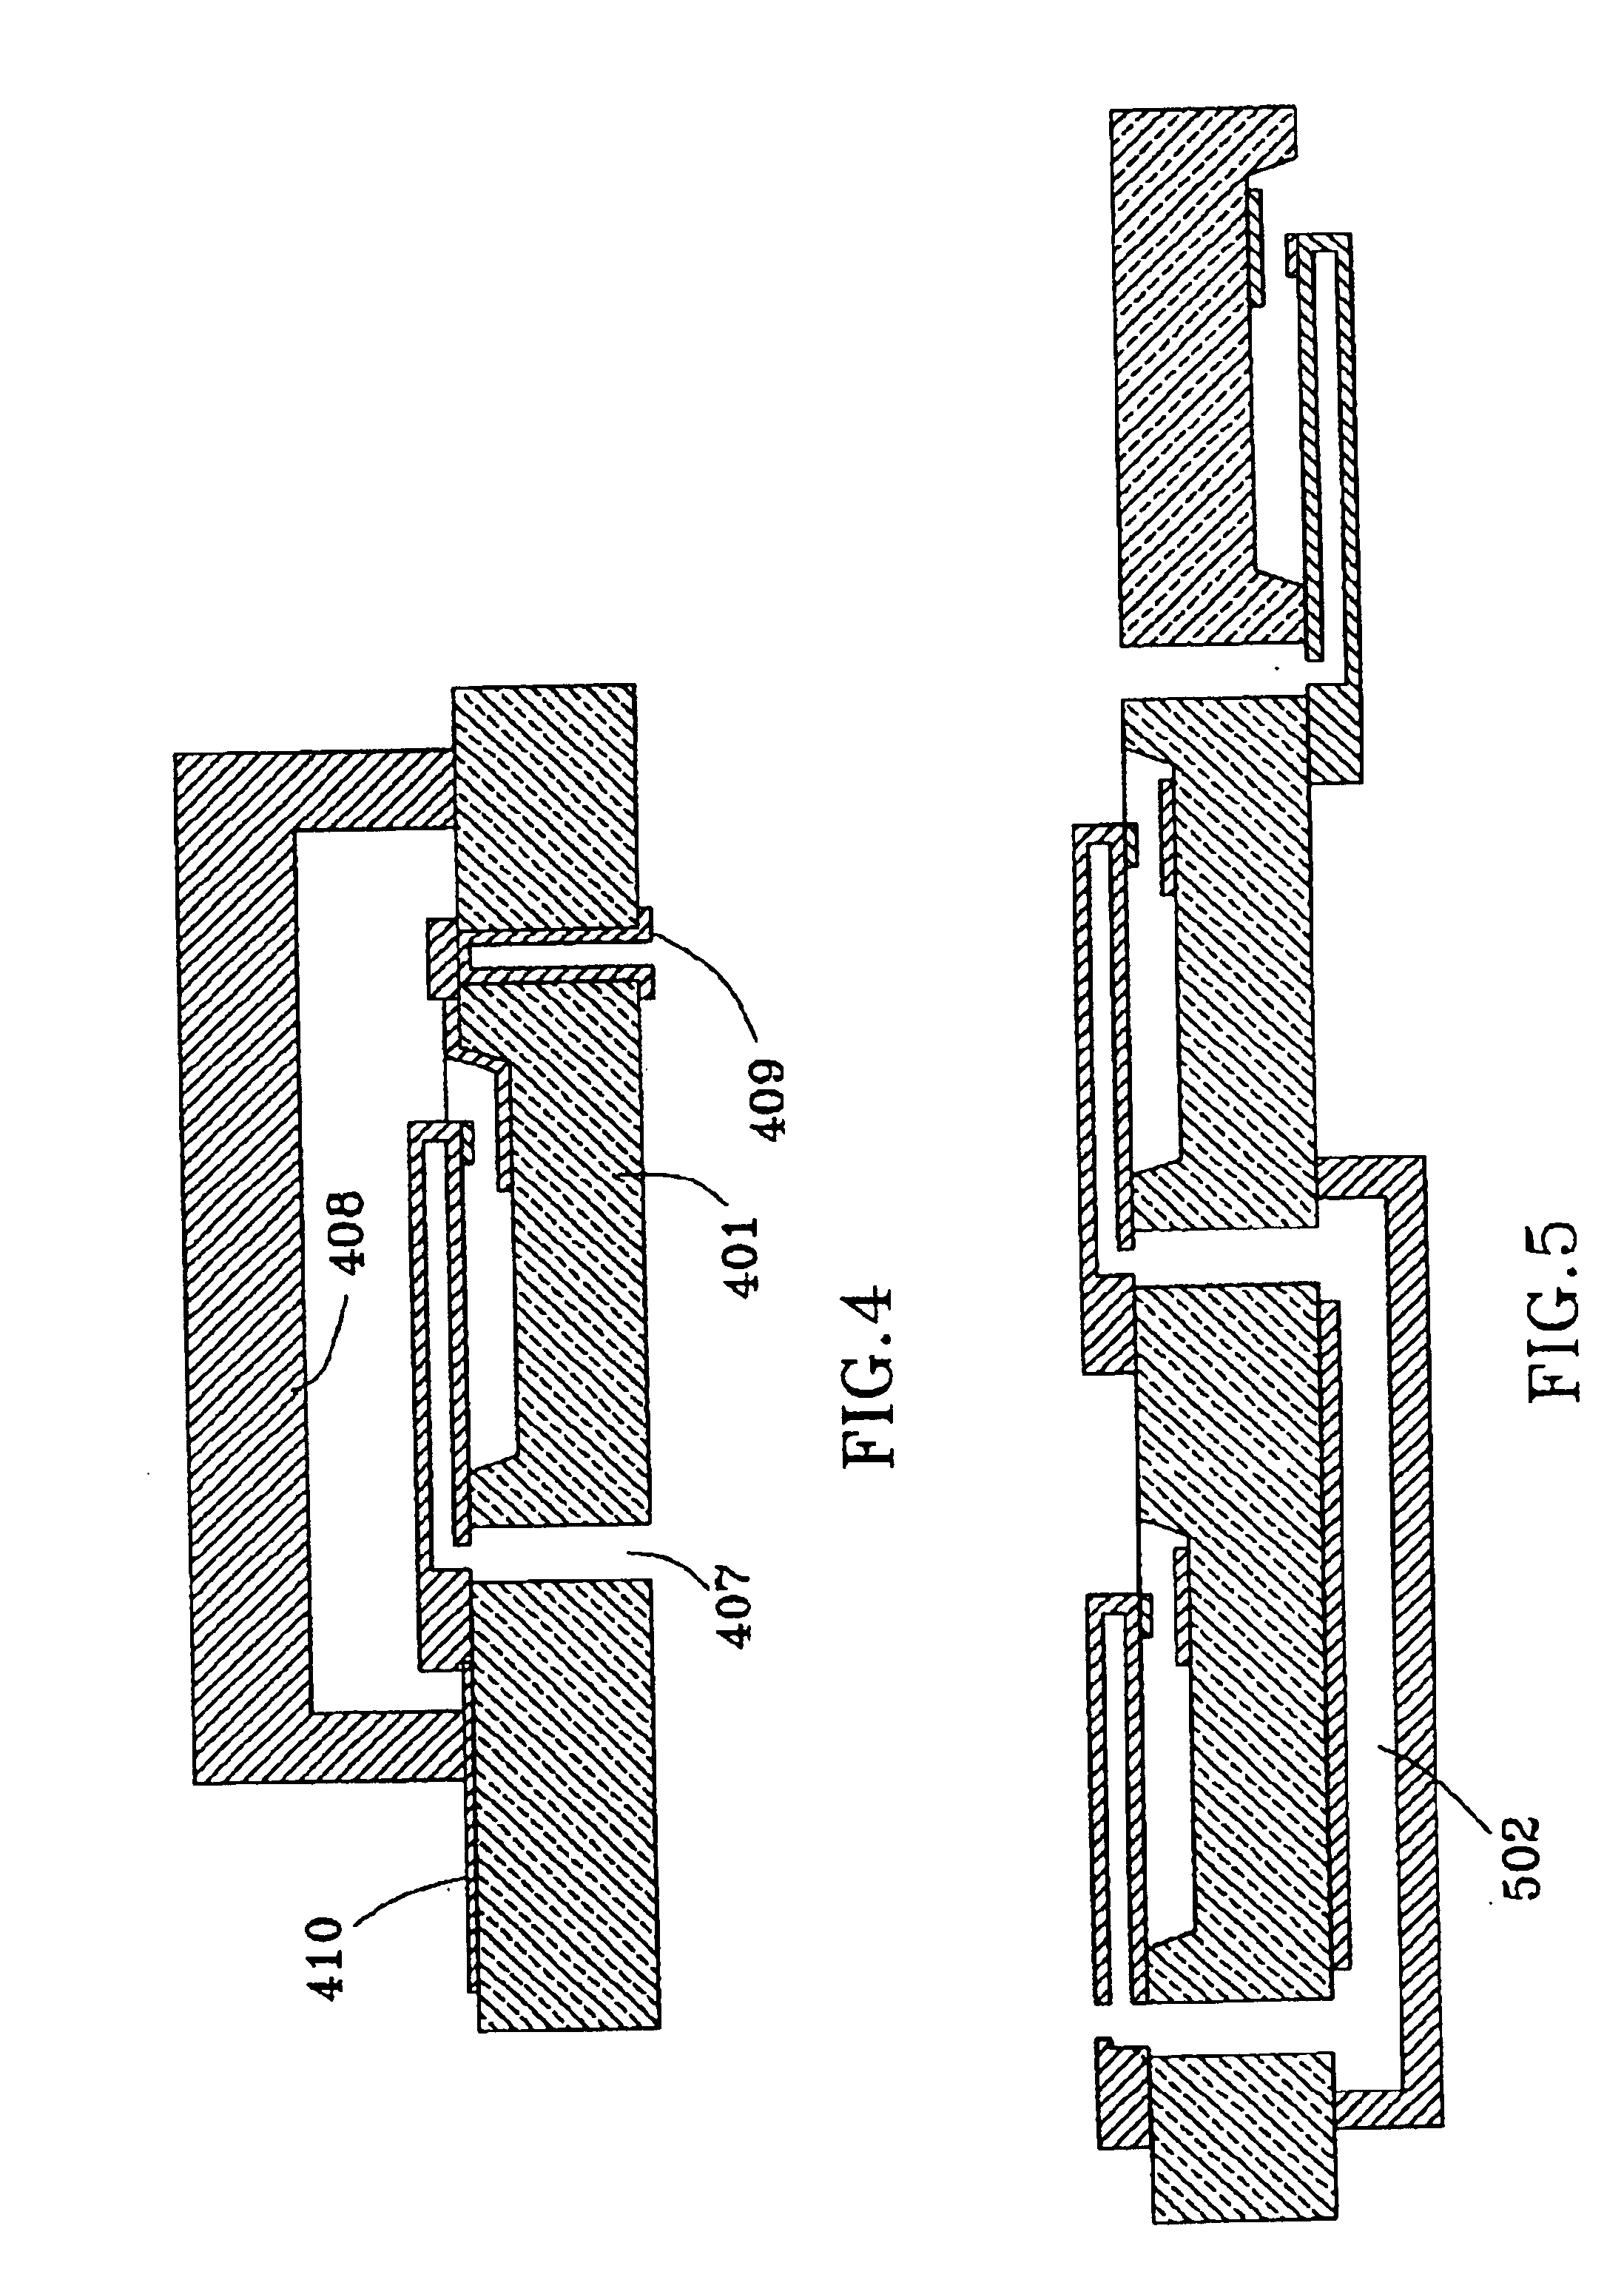 Method of fabricating a micromachined tube for fluid flow